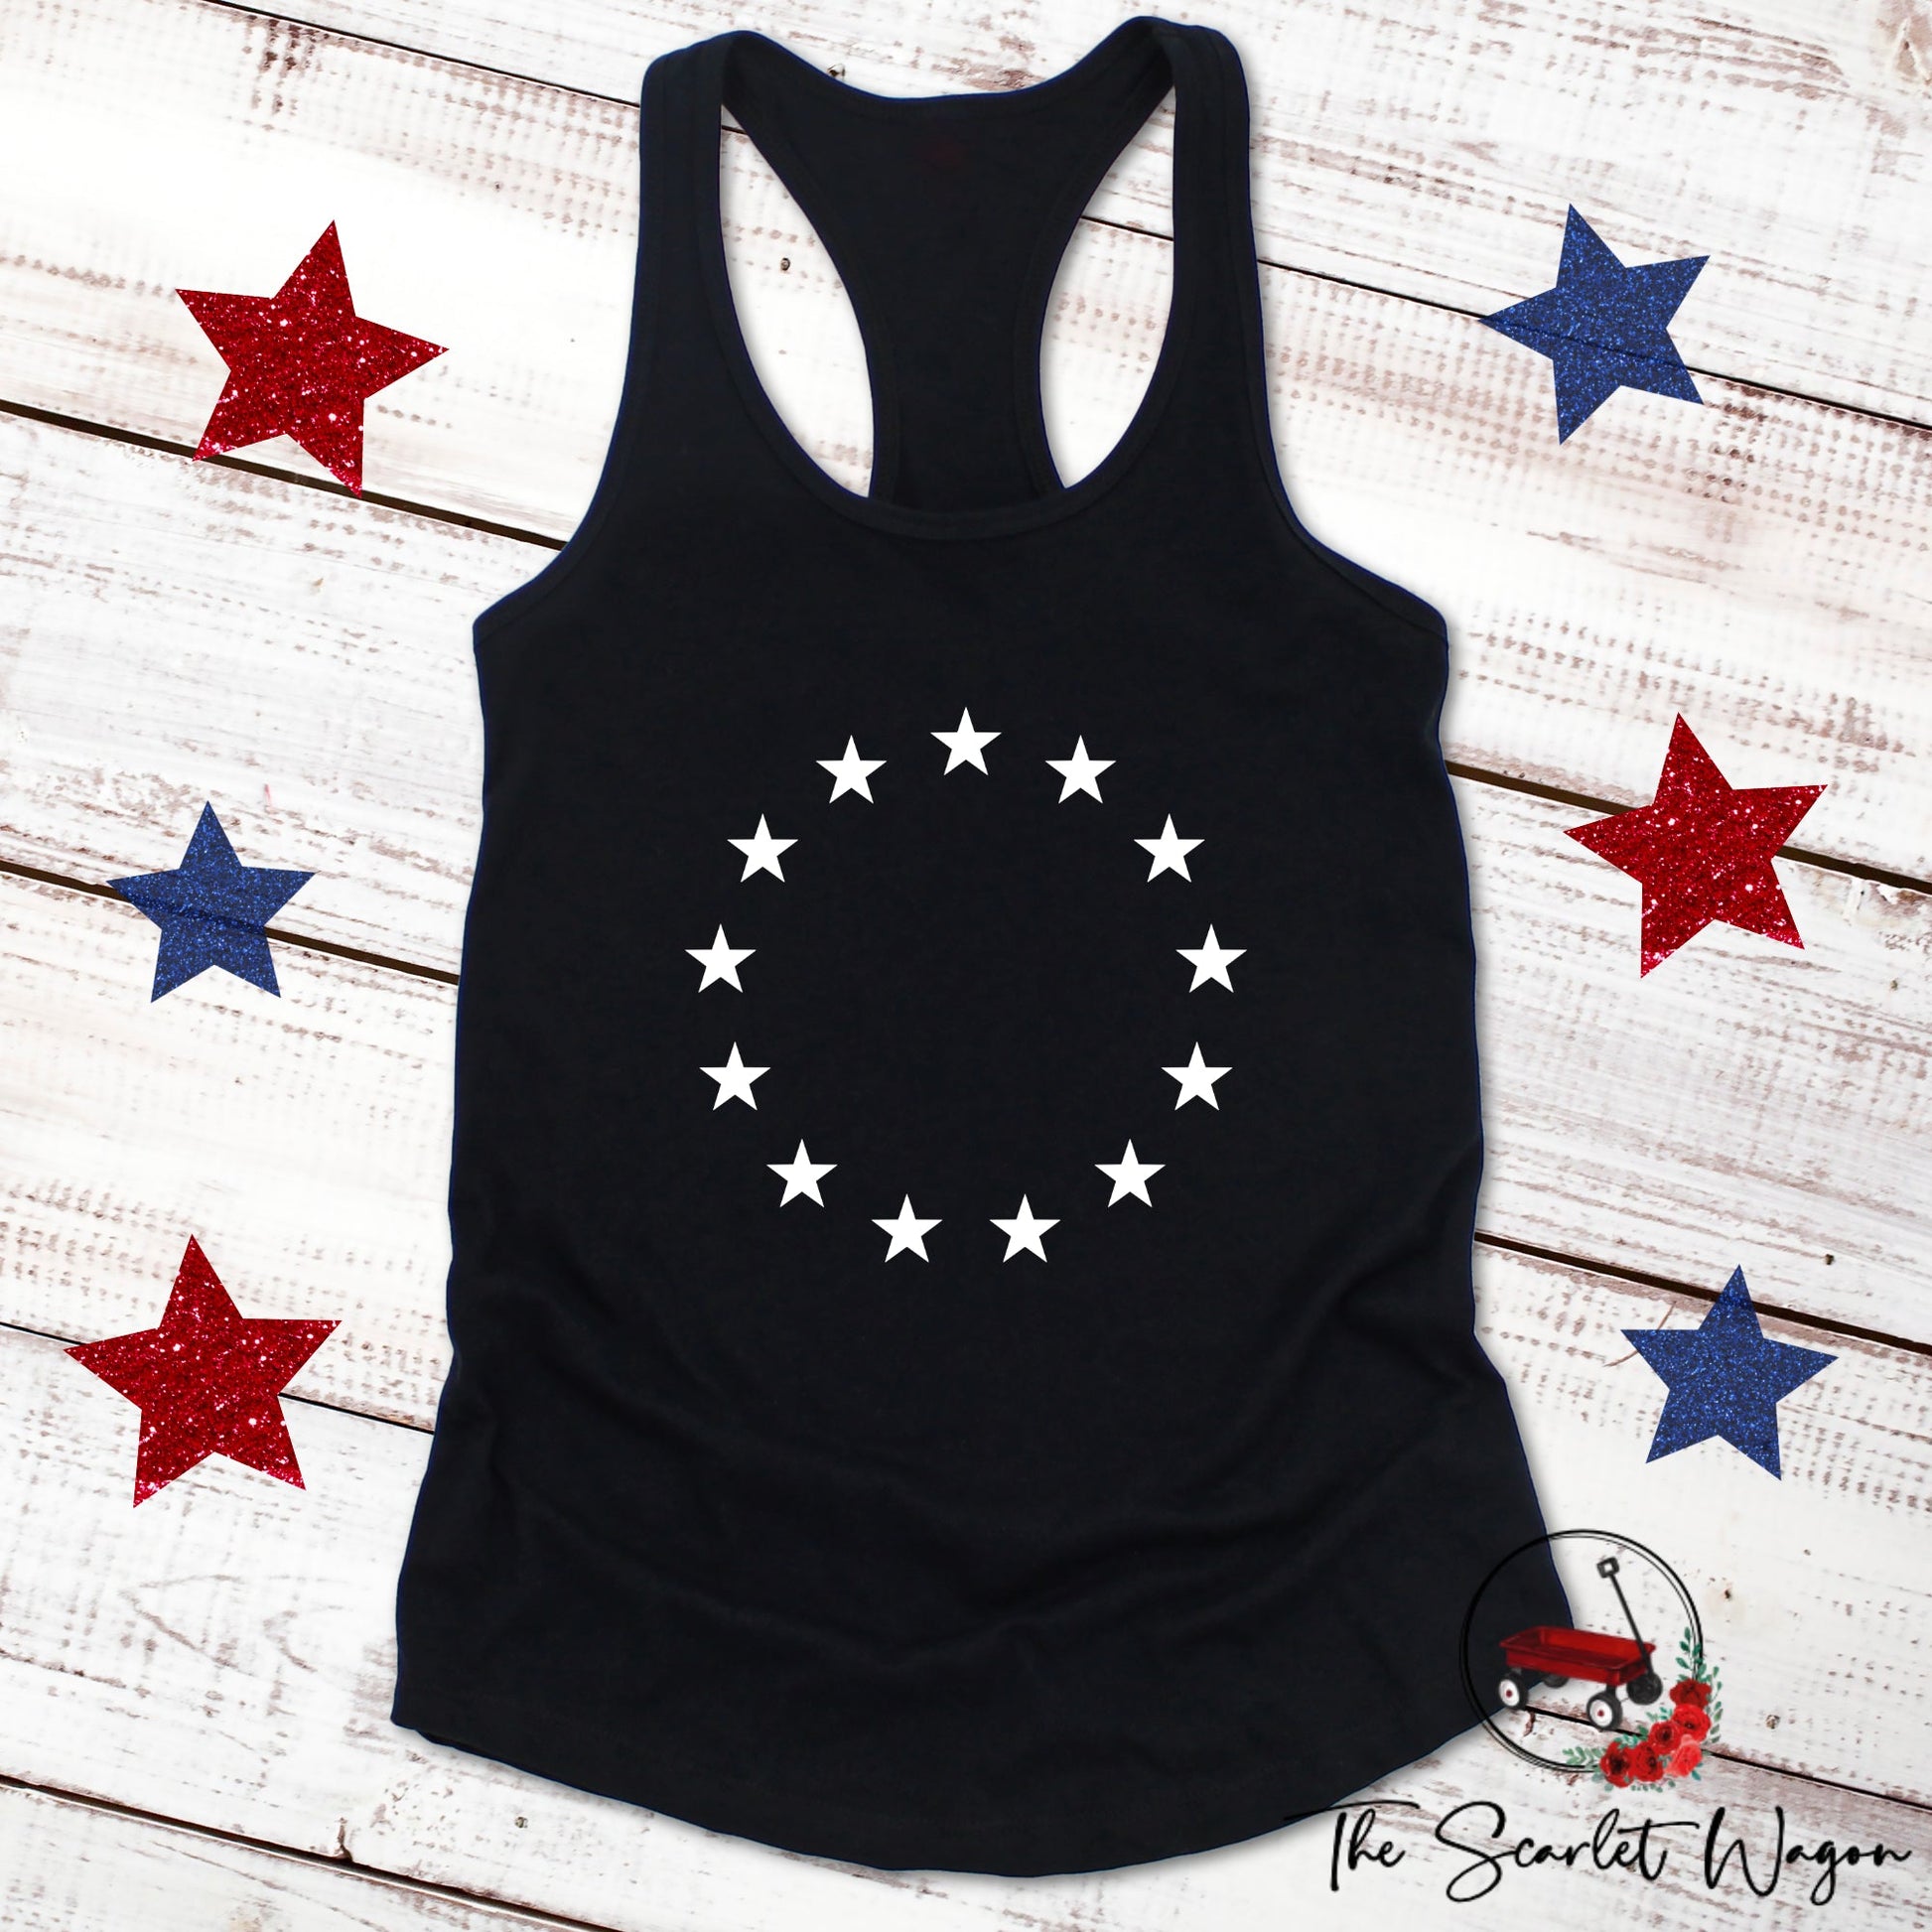 Betsy Ross Flag Women's Racerback Tank Patriotic Shirt The Scarlet Wagon Boutique Black Small 